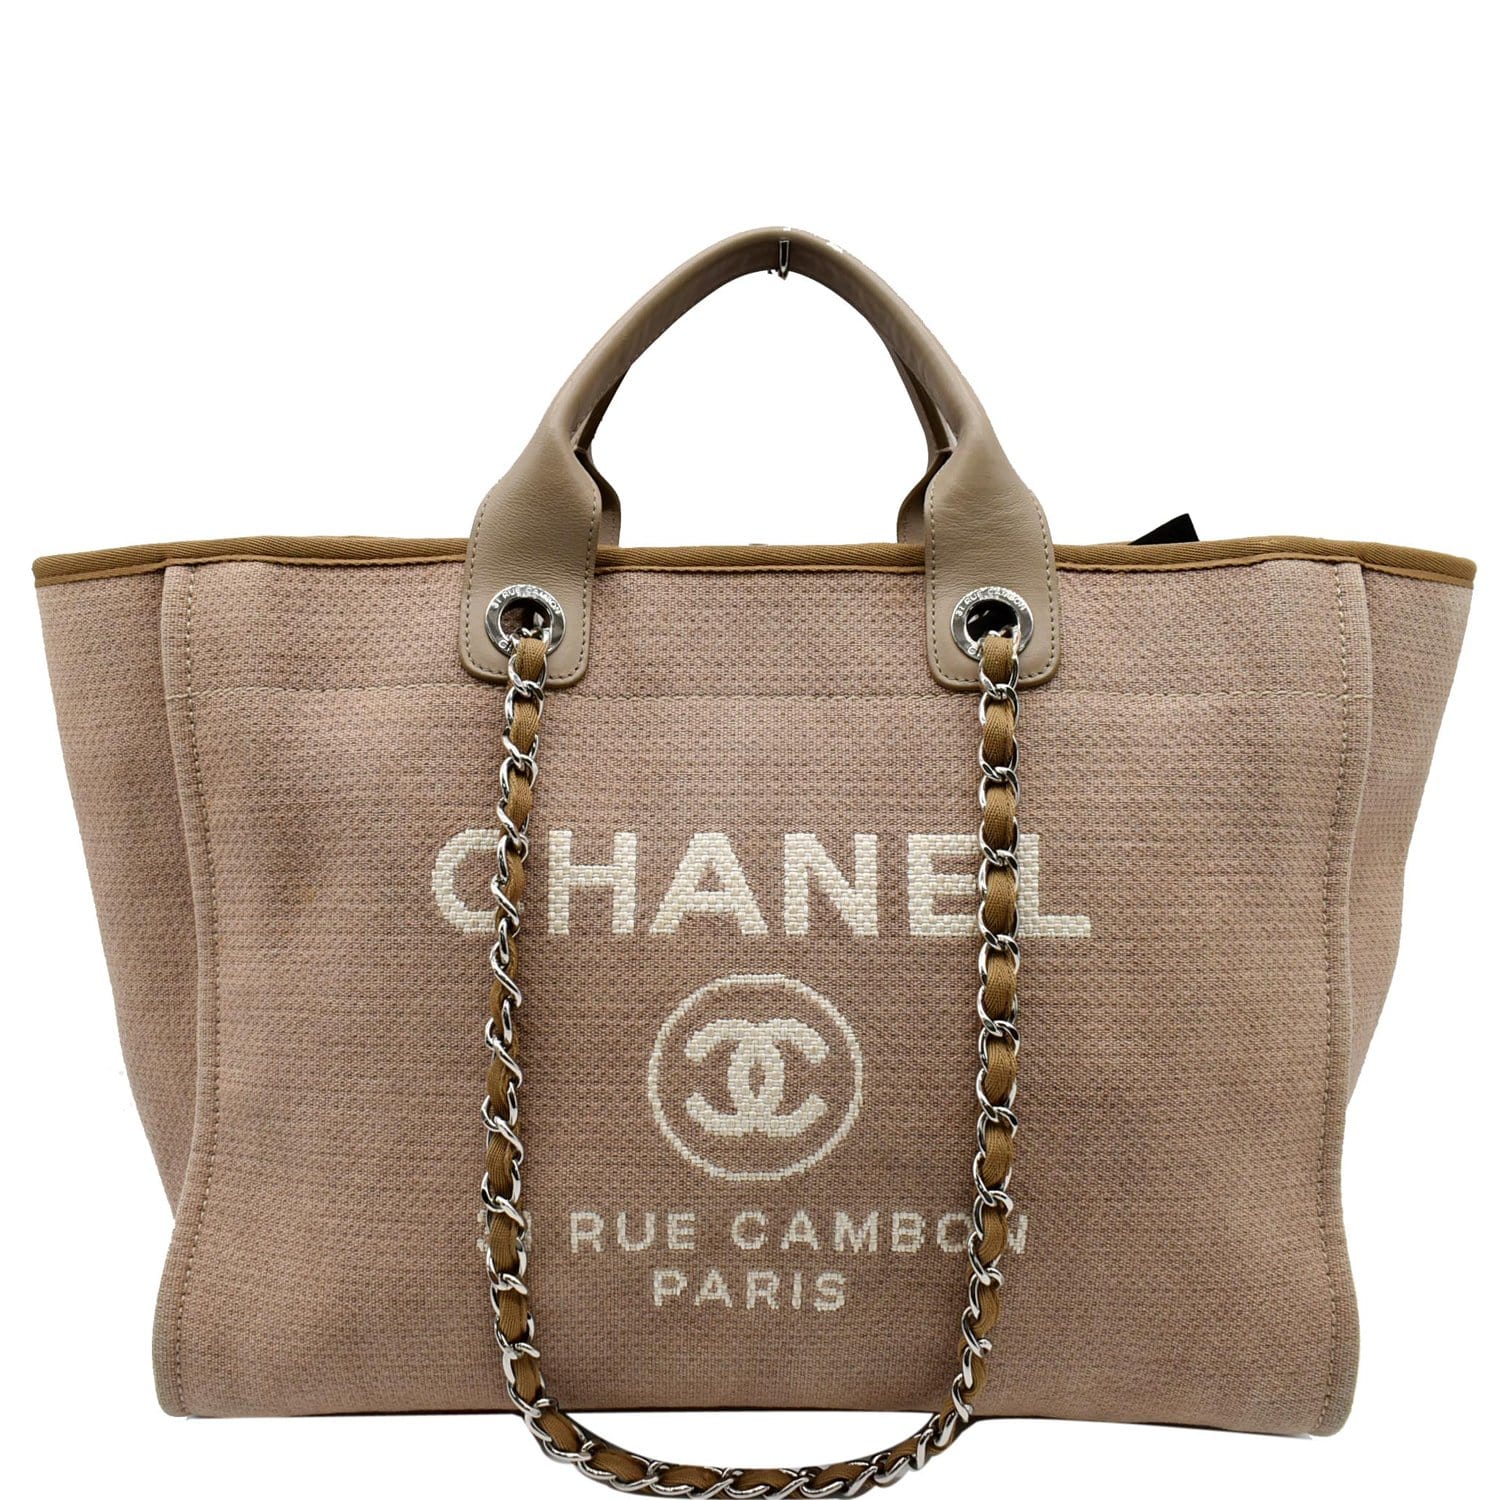 What's In My Work Bag? (Chanel Deauville Tote) 